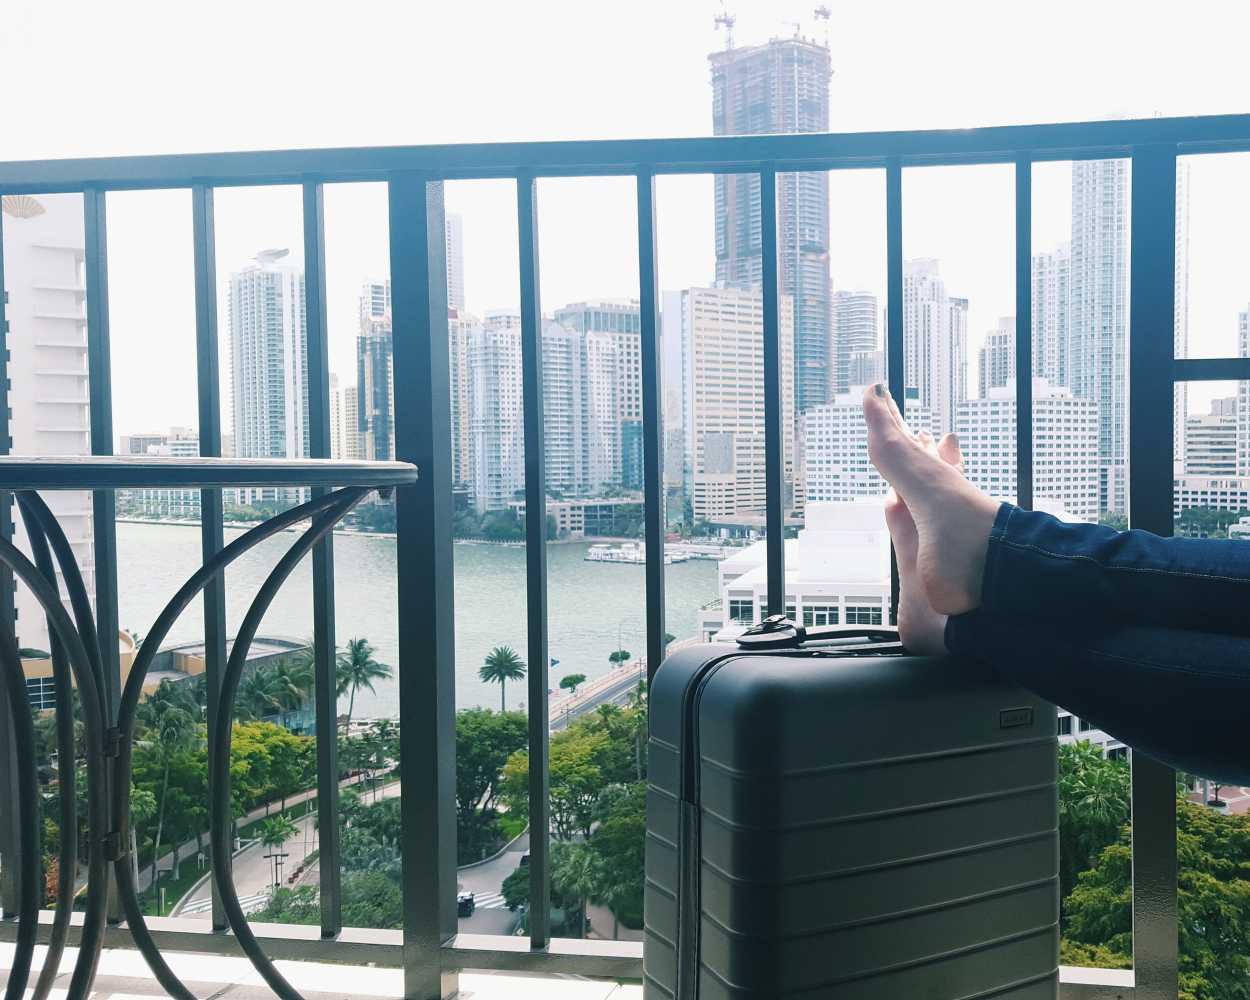 Alyssa rests her feet on an Away suitcase on a balcony in Miami